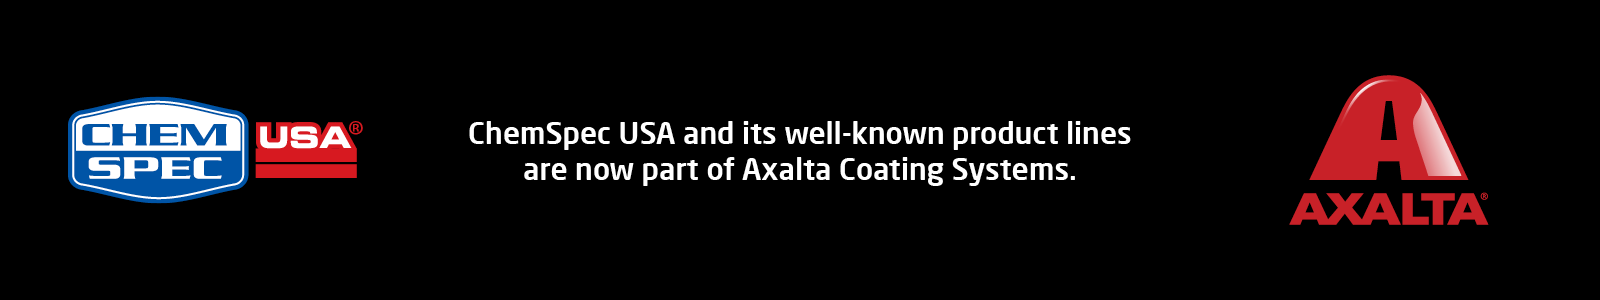 Chemspec USA is now part of Axalta Coating Systems